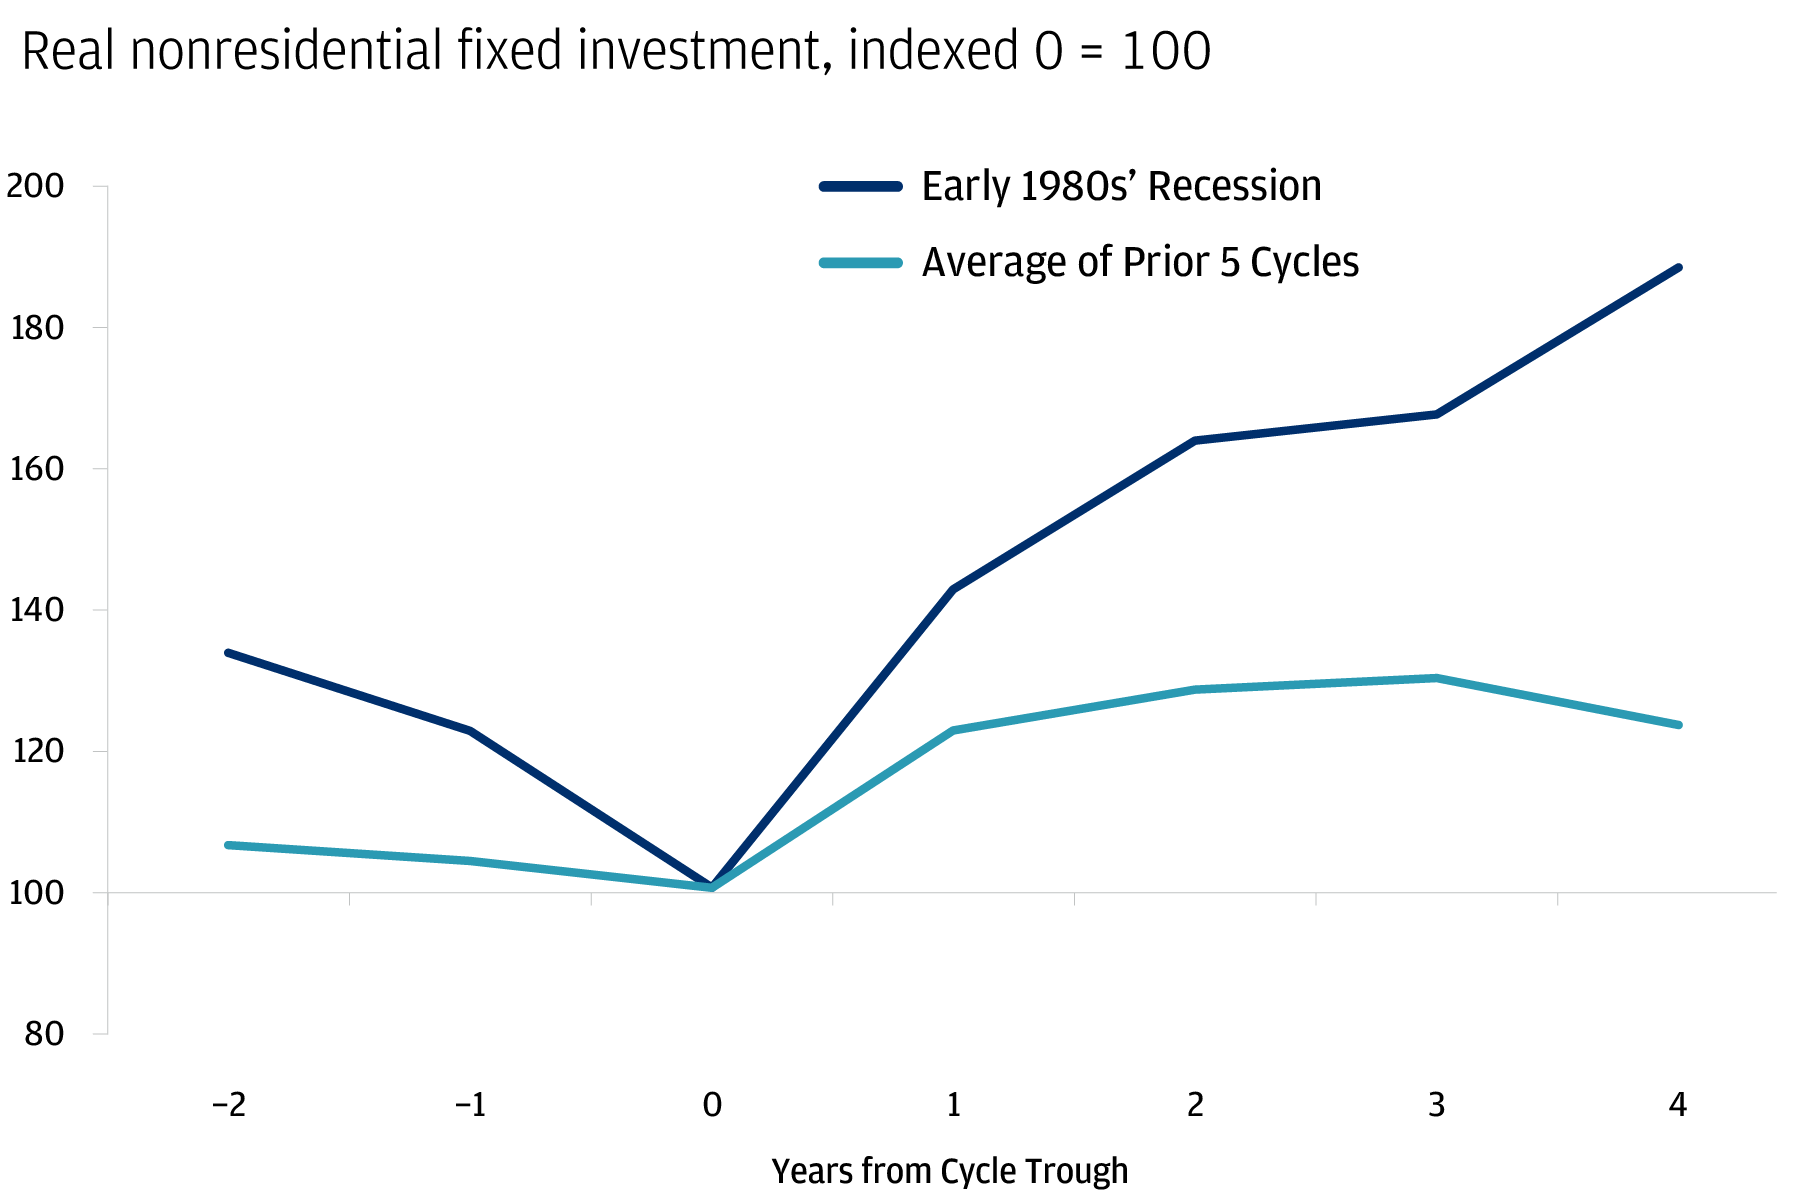 The chart shows real nonresidential fixed investment indexed at 100 at the year of recession. There are two lines with one representing the early 80s recession and the other one being the average of prior 5 cycles.